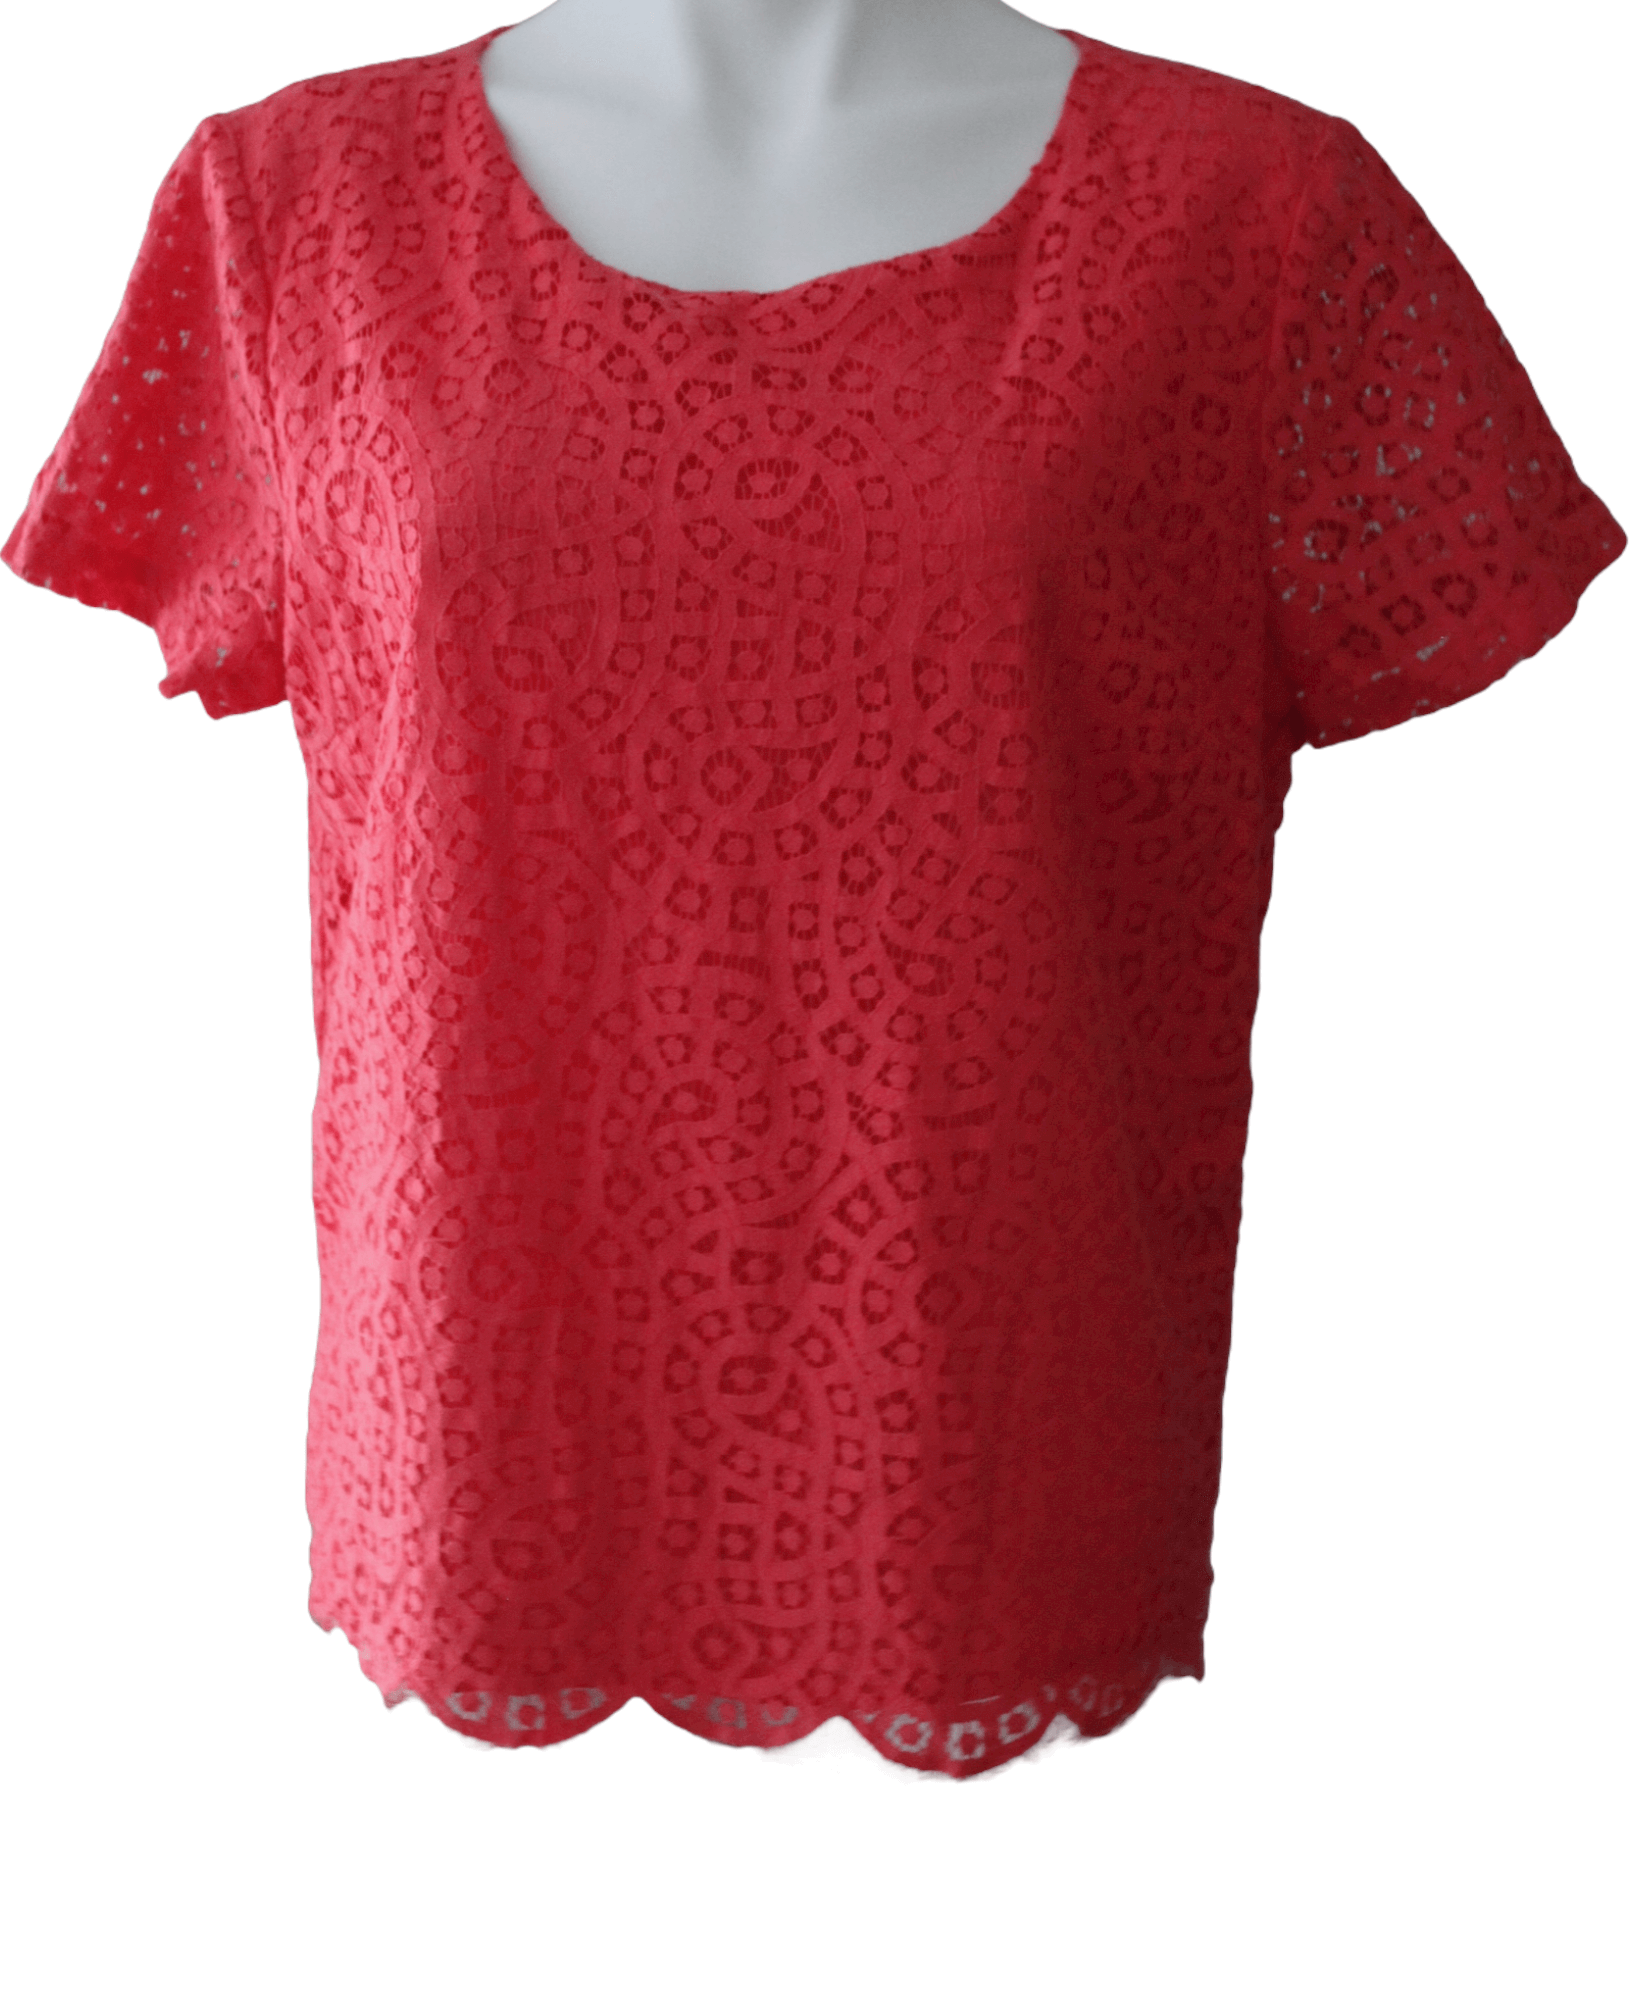 Warm Spring J.CREW coral lace blouse